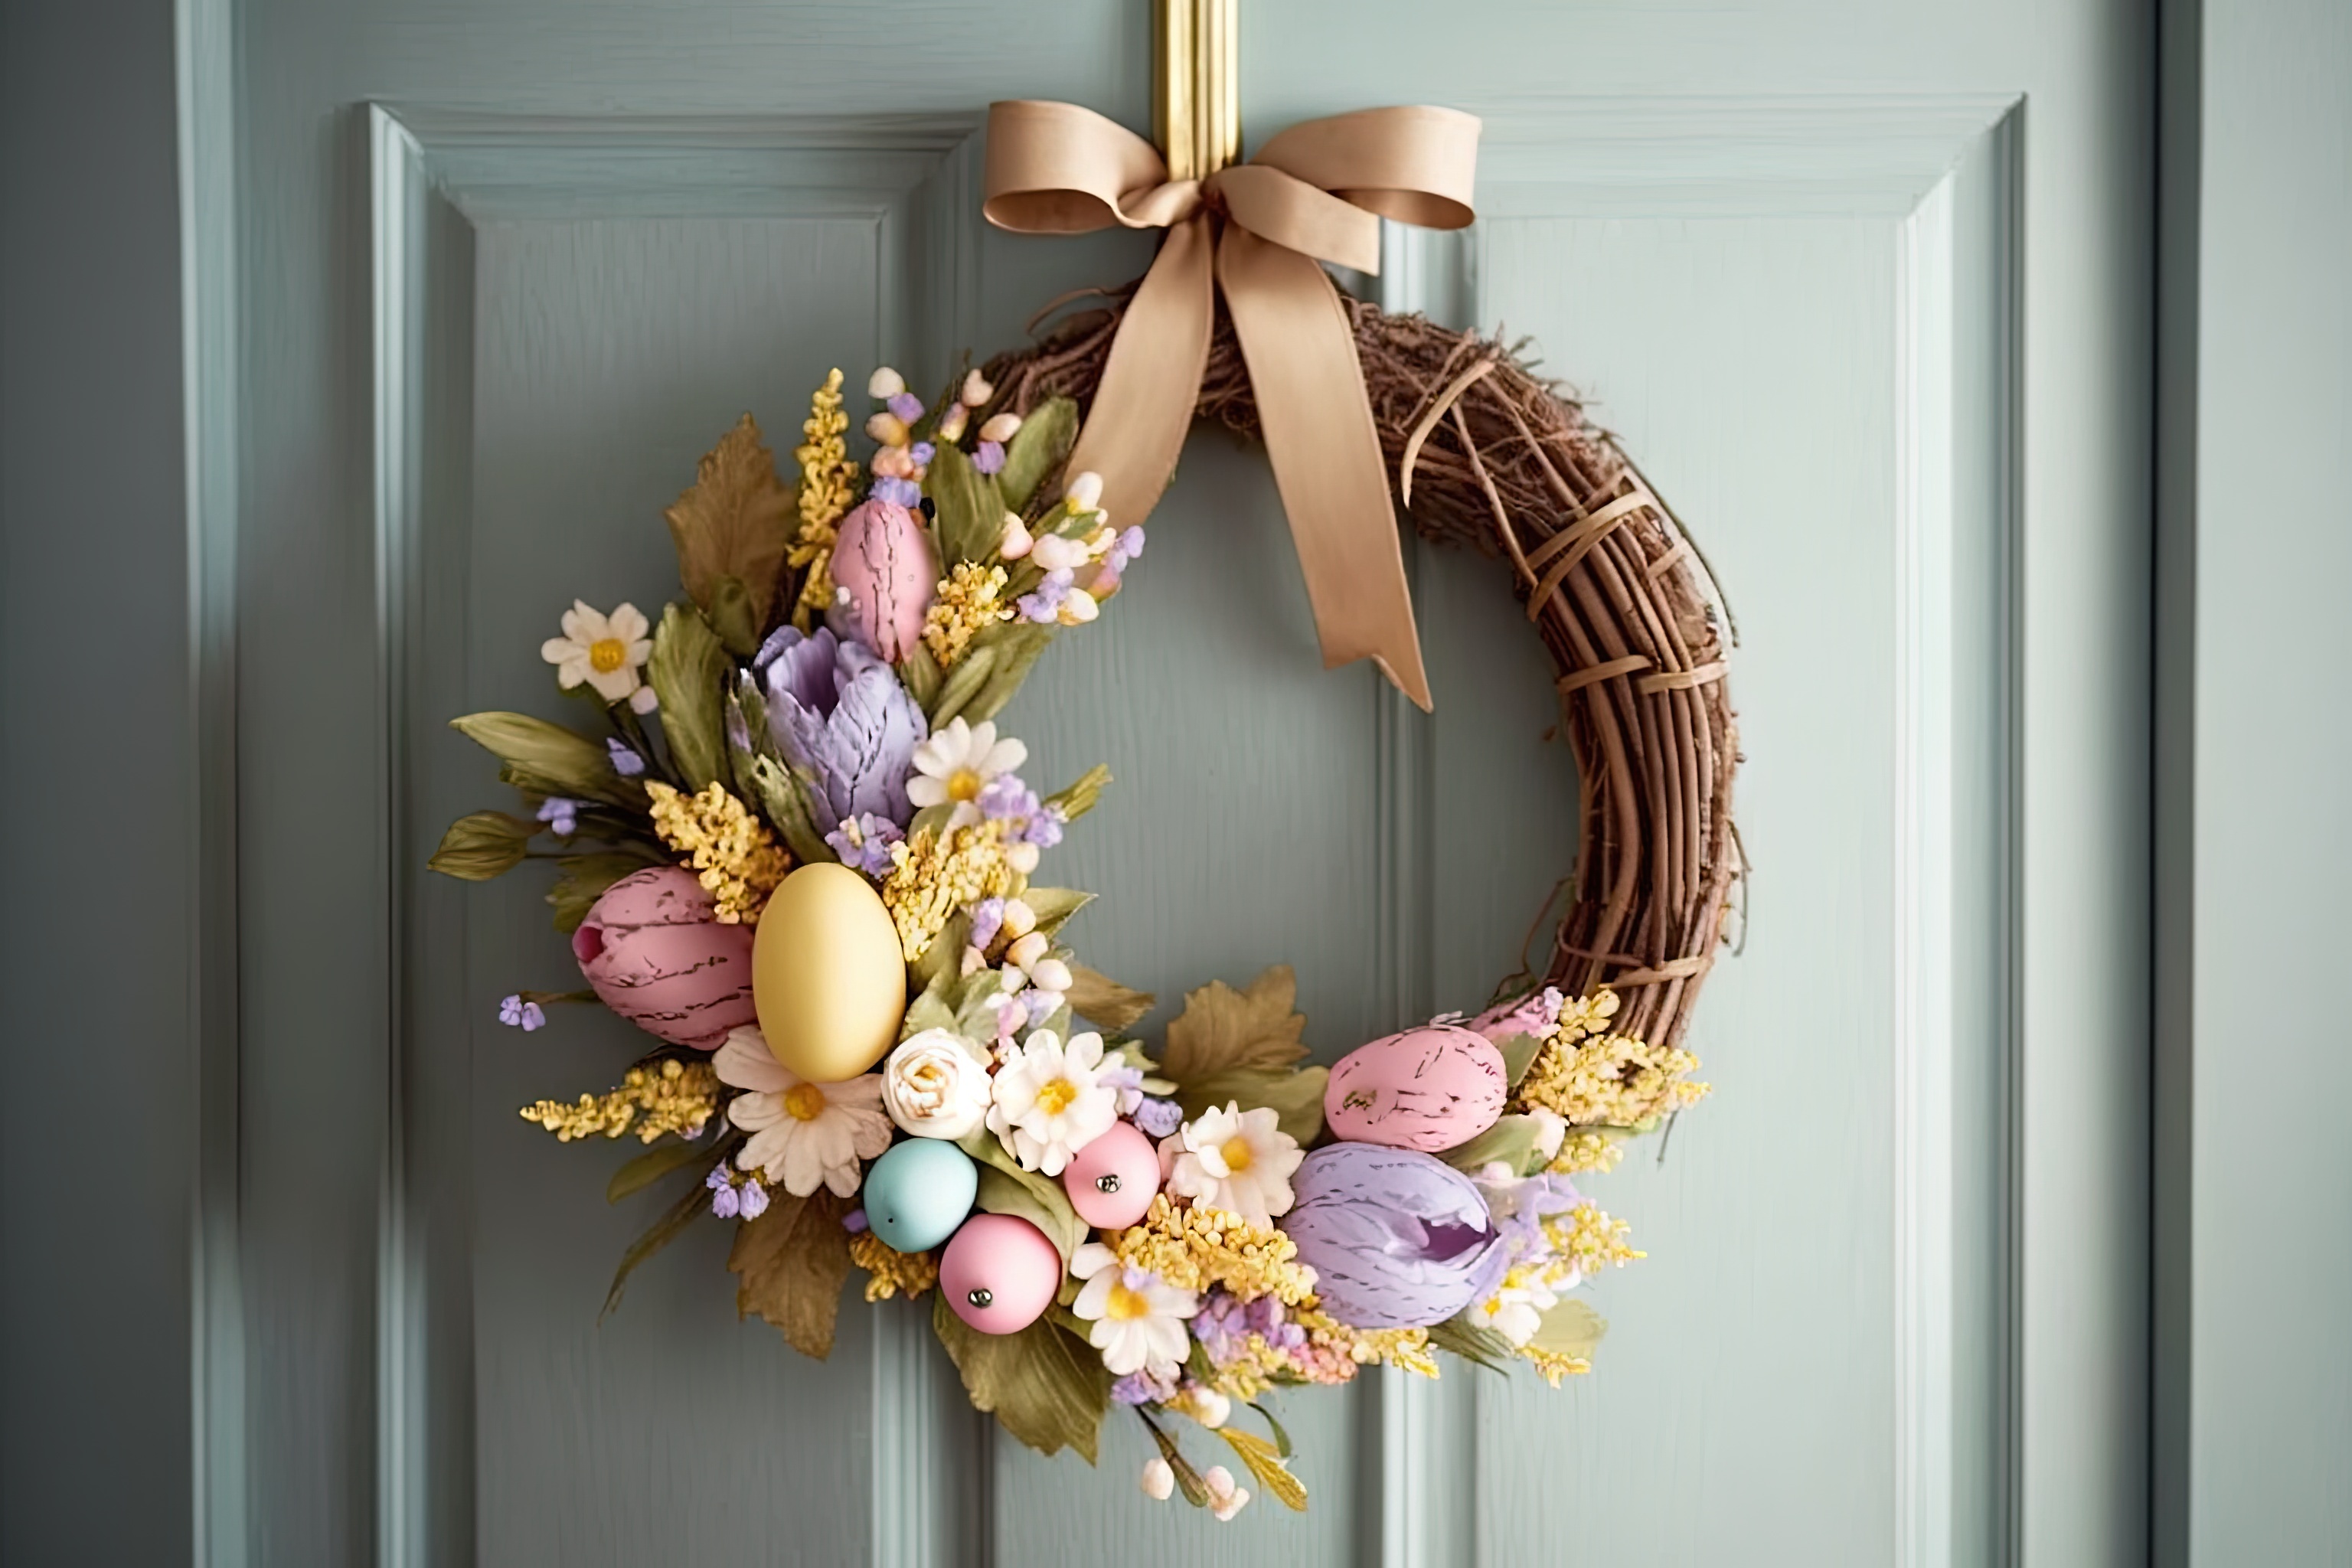 Beautiful door decorations needn’t be confined to Christmas